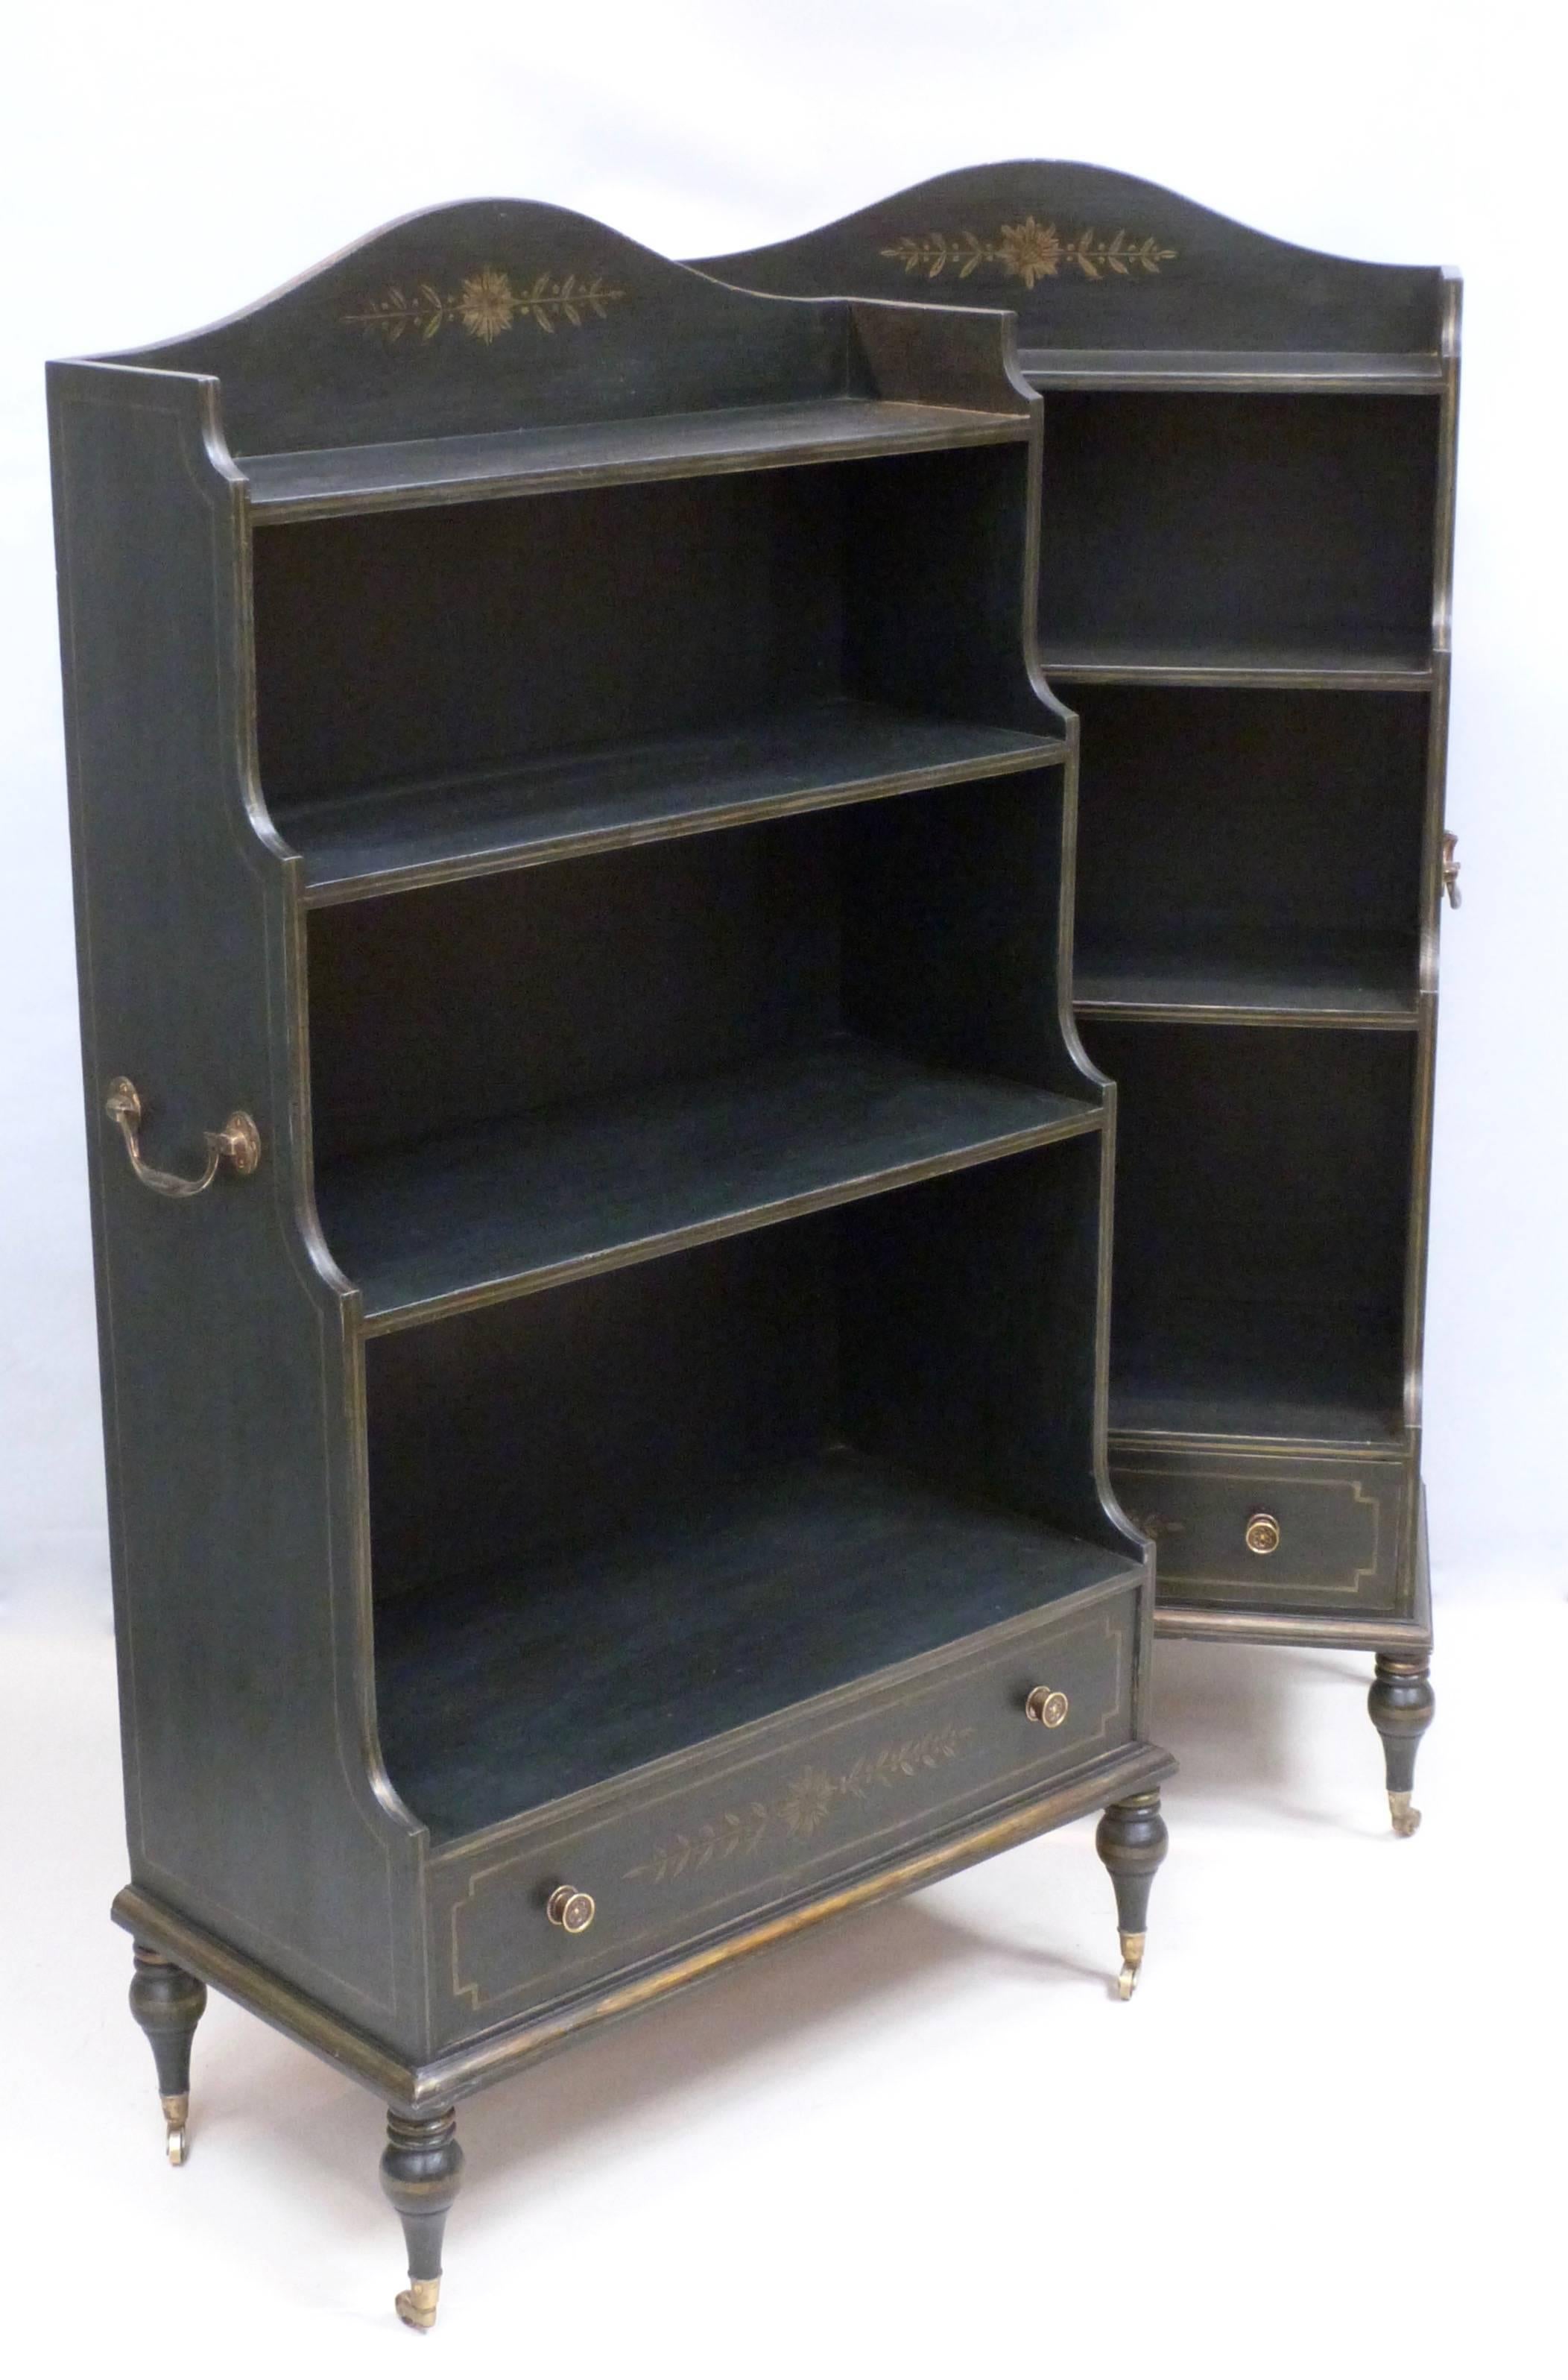 A pair of contemporary ebonized waterfall bookcases in the style of George III, with brass carry handles and brass castors.